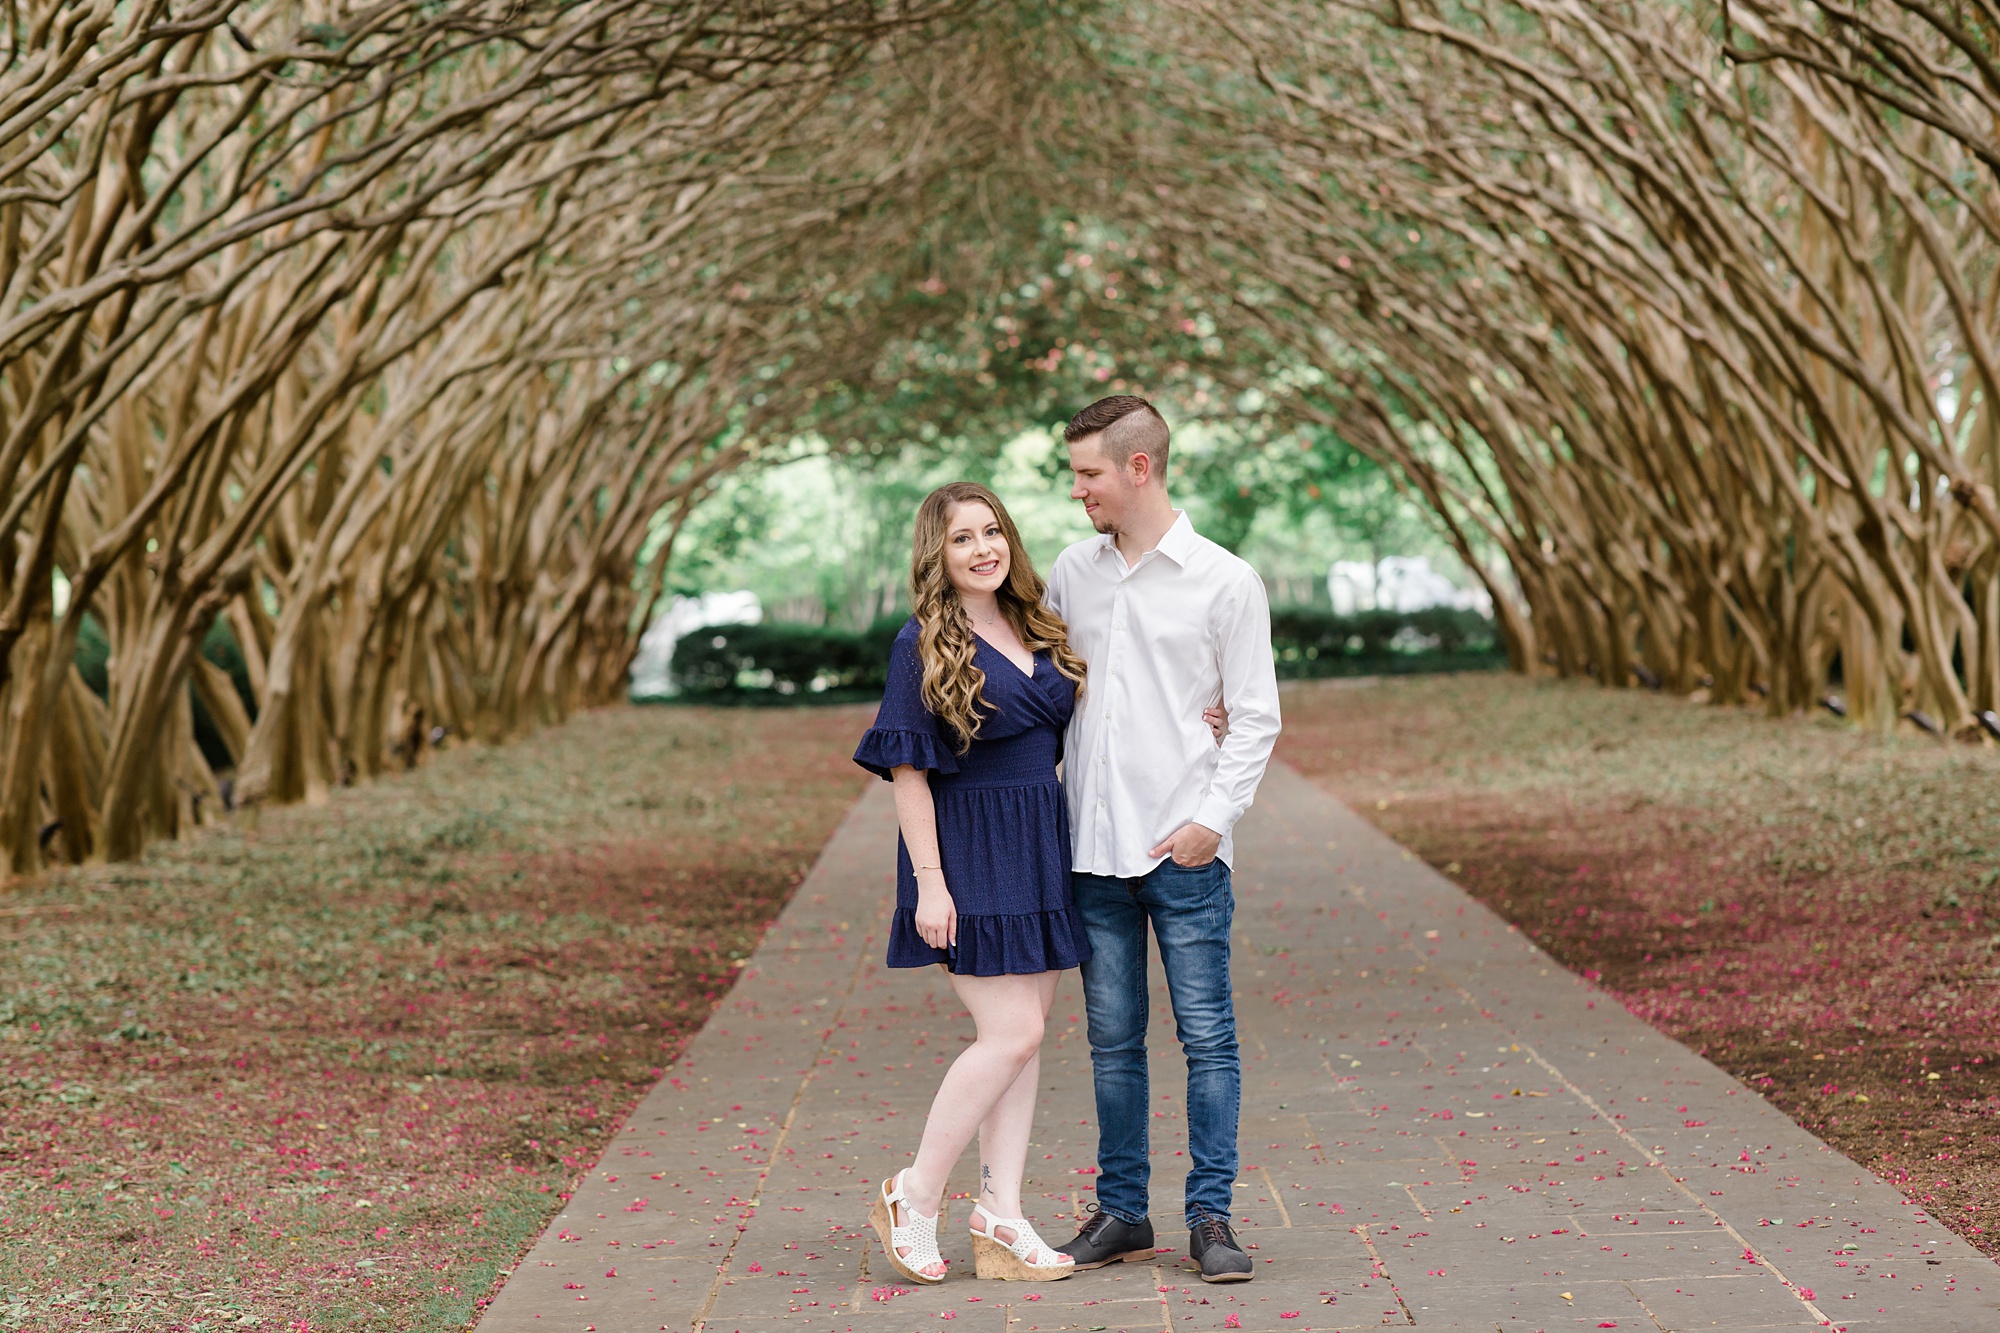 branch walkway at Dallas Arboretum with engaged couple posing underneath 